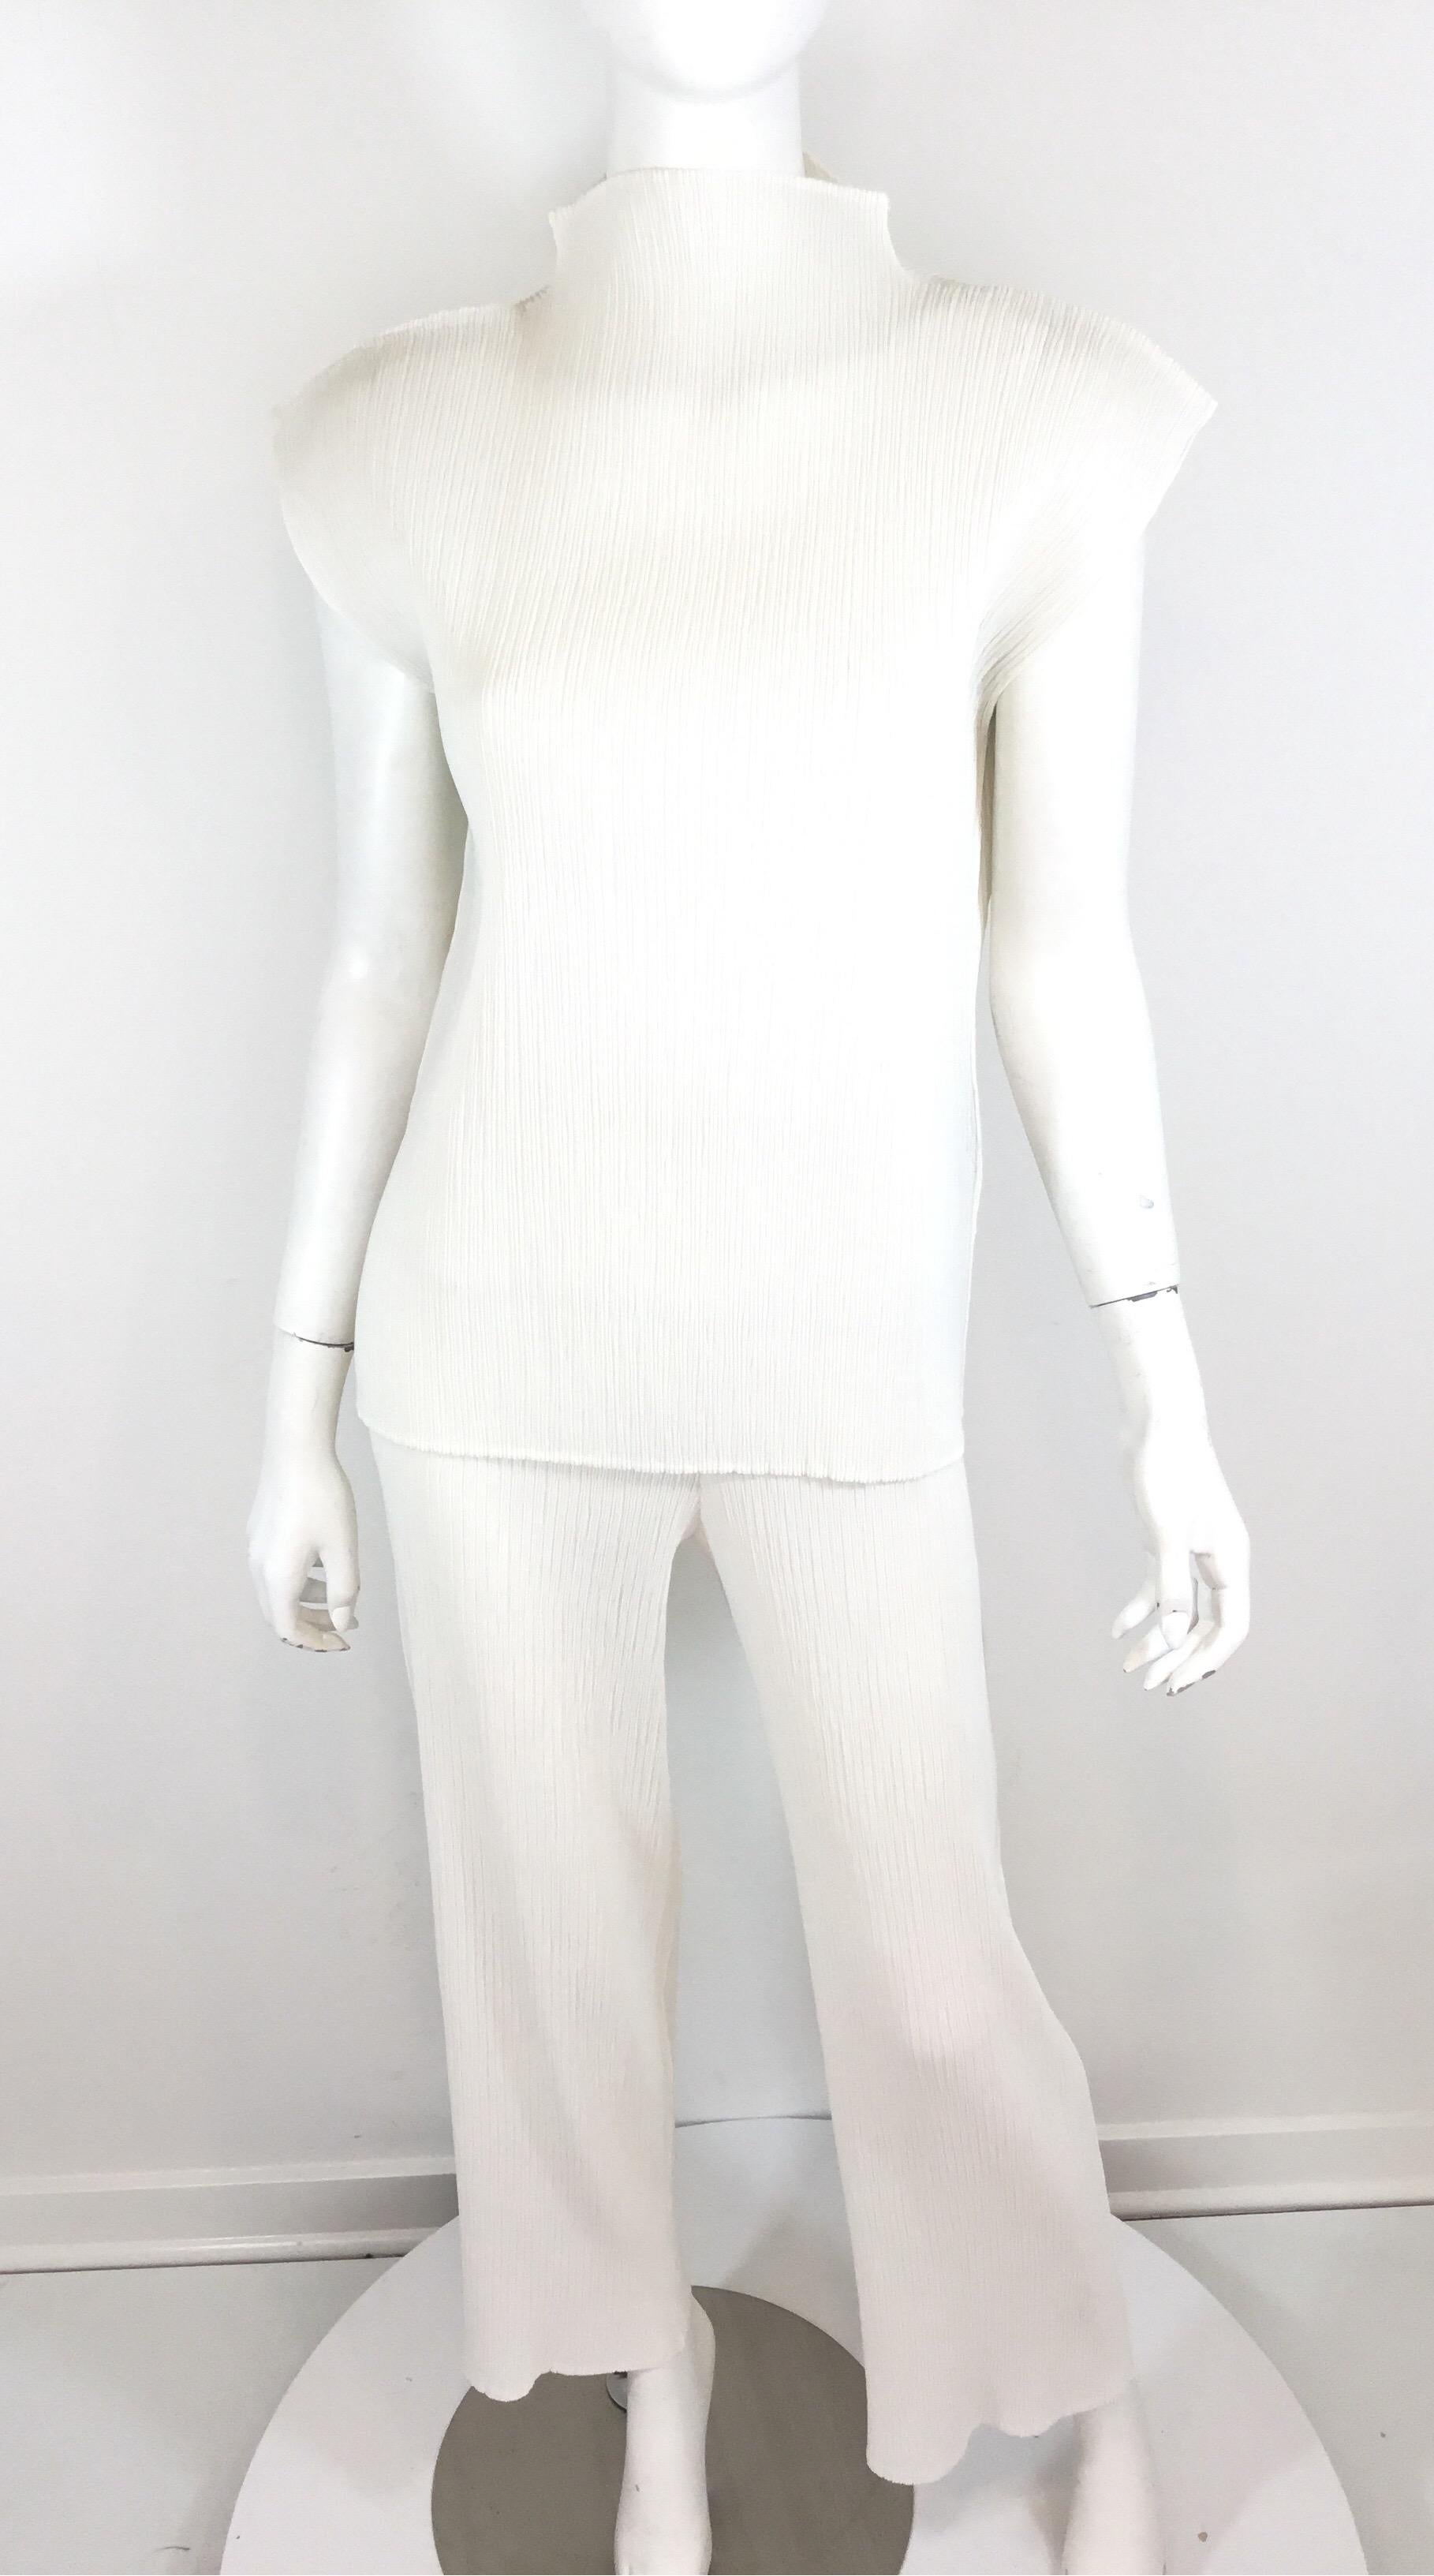 Issey Miyake Pleated Pant + Top set in white, size small. Composed of 100% polyester. Pants have elastic band around the waist. Made in Japan.

Measurements:
Top- bust 37'' (with stretch), length 26'', shoulder to shoulder 19''

Pants- waist 24''